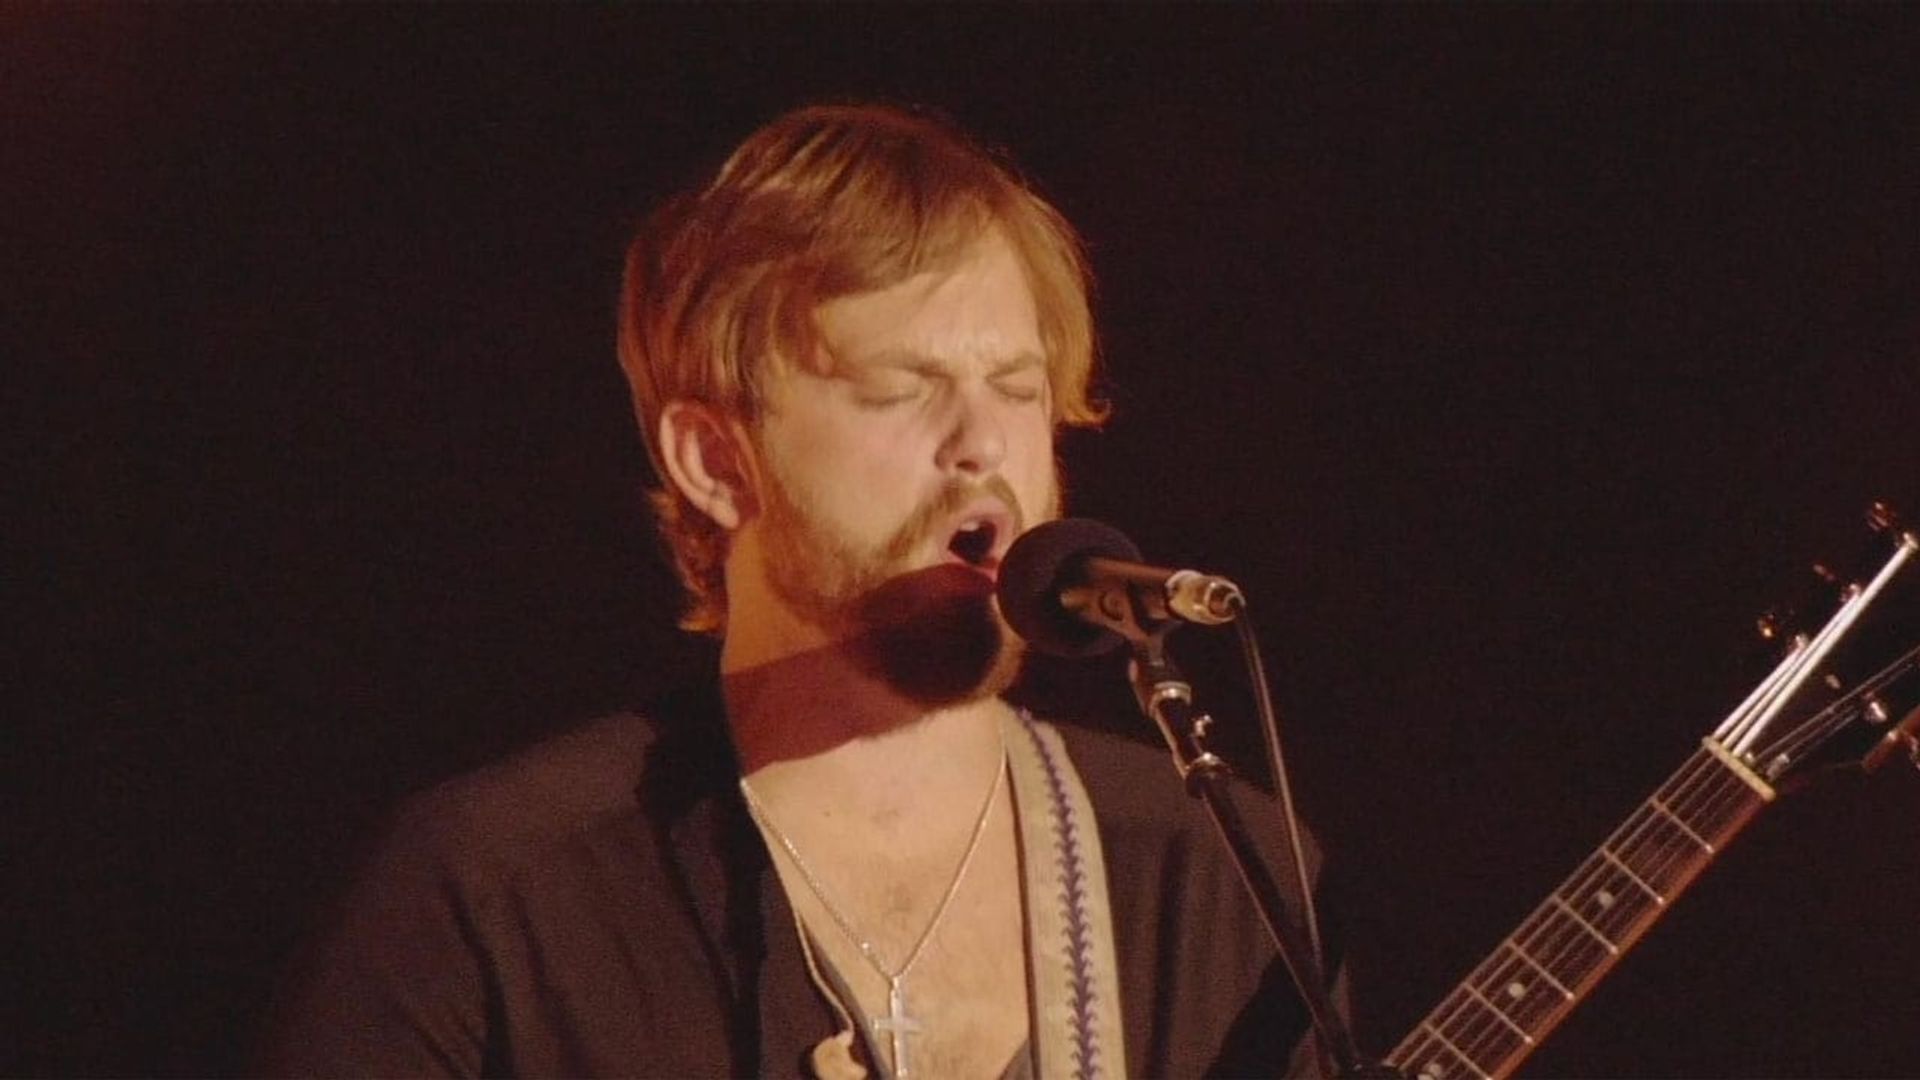 Kings of Leon: Live at the O2 London, England background